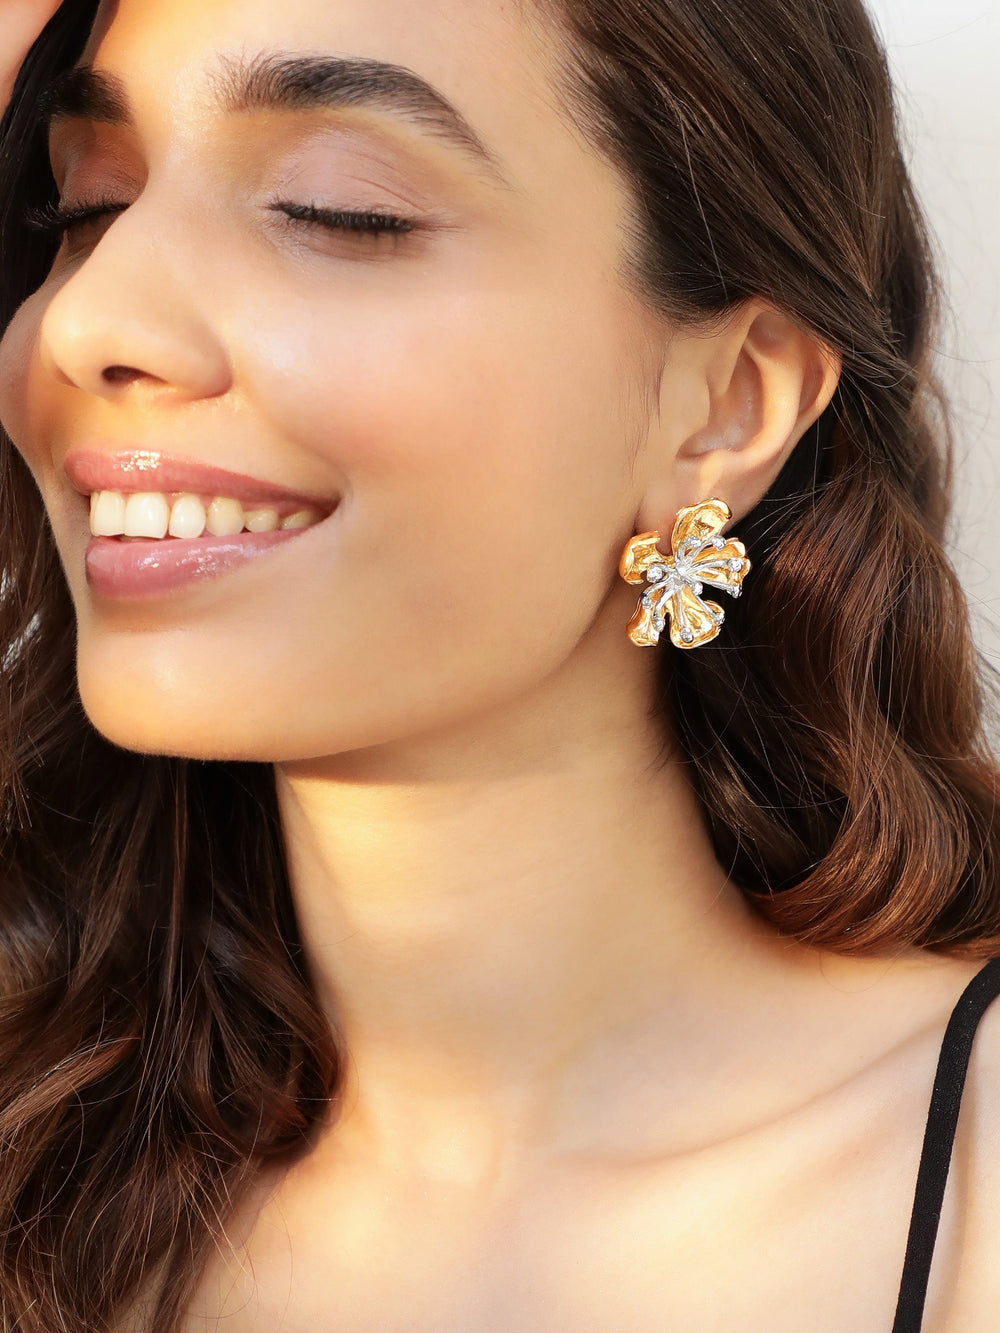 Rubans Voguish Gold-Plated Floral Studs Earrings Earrings